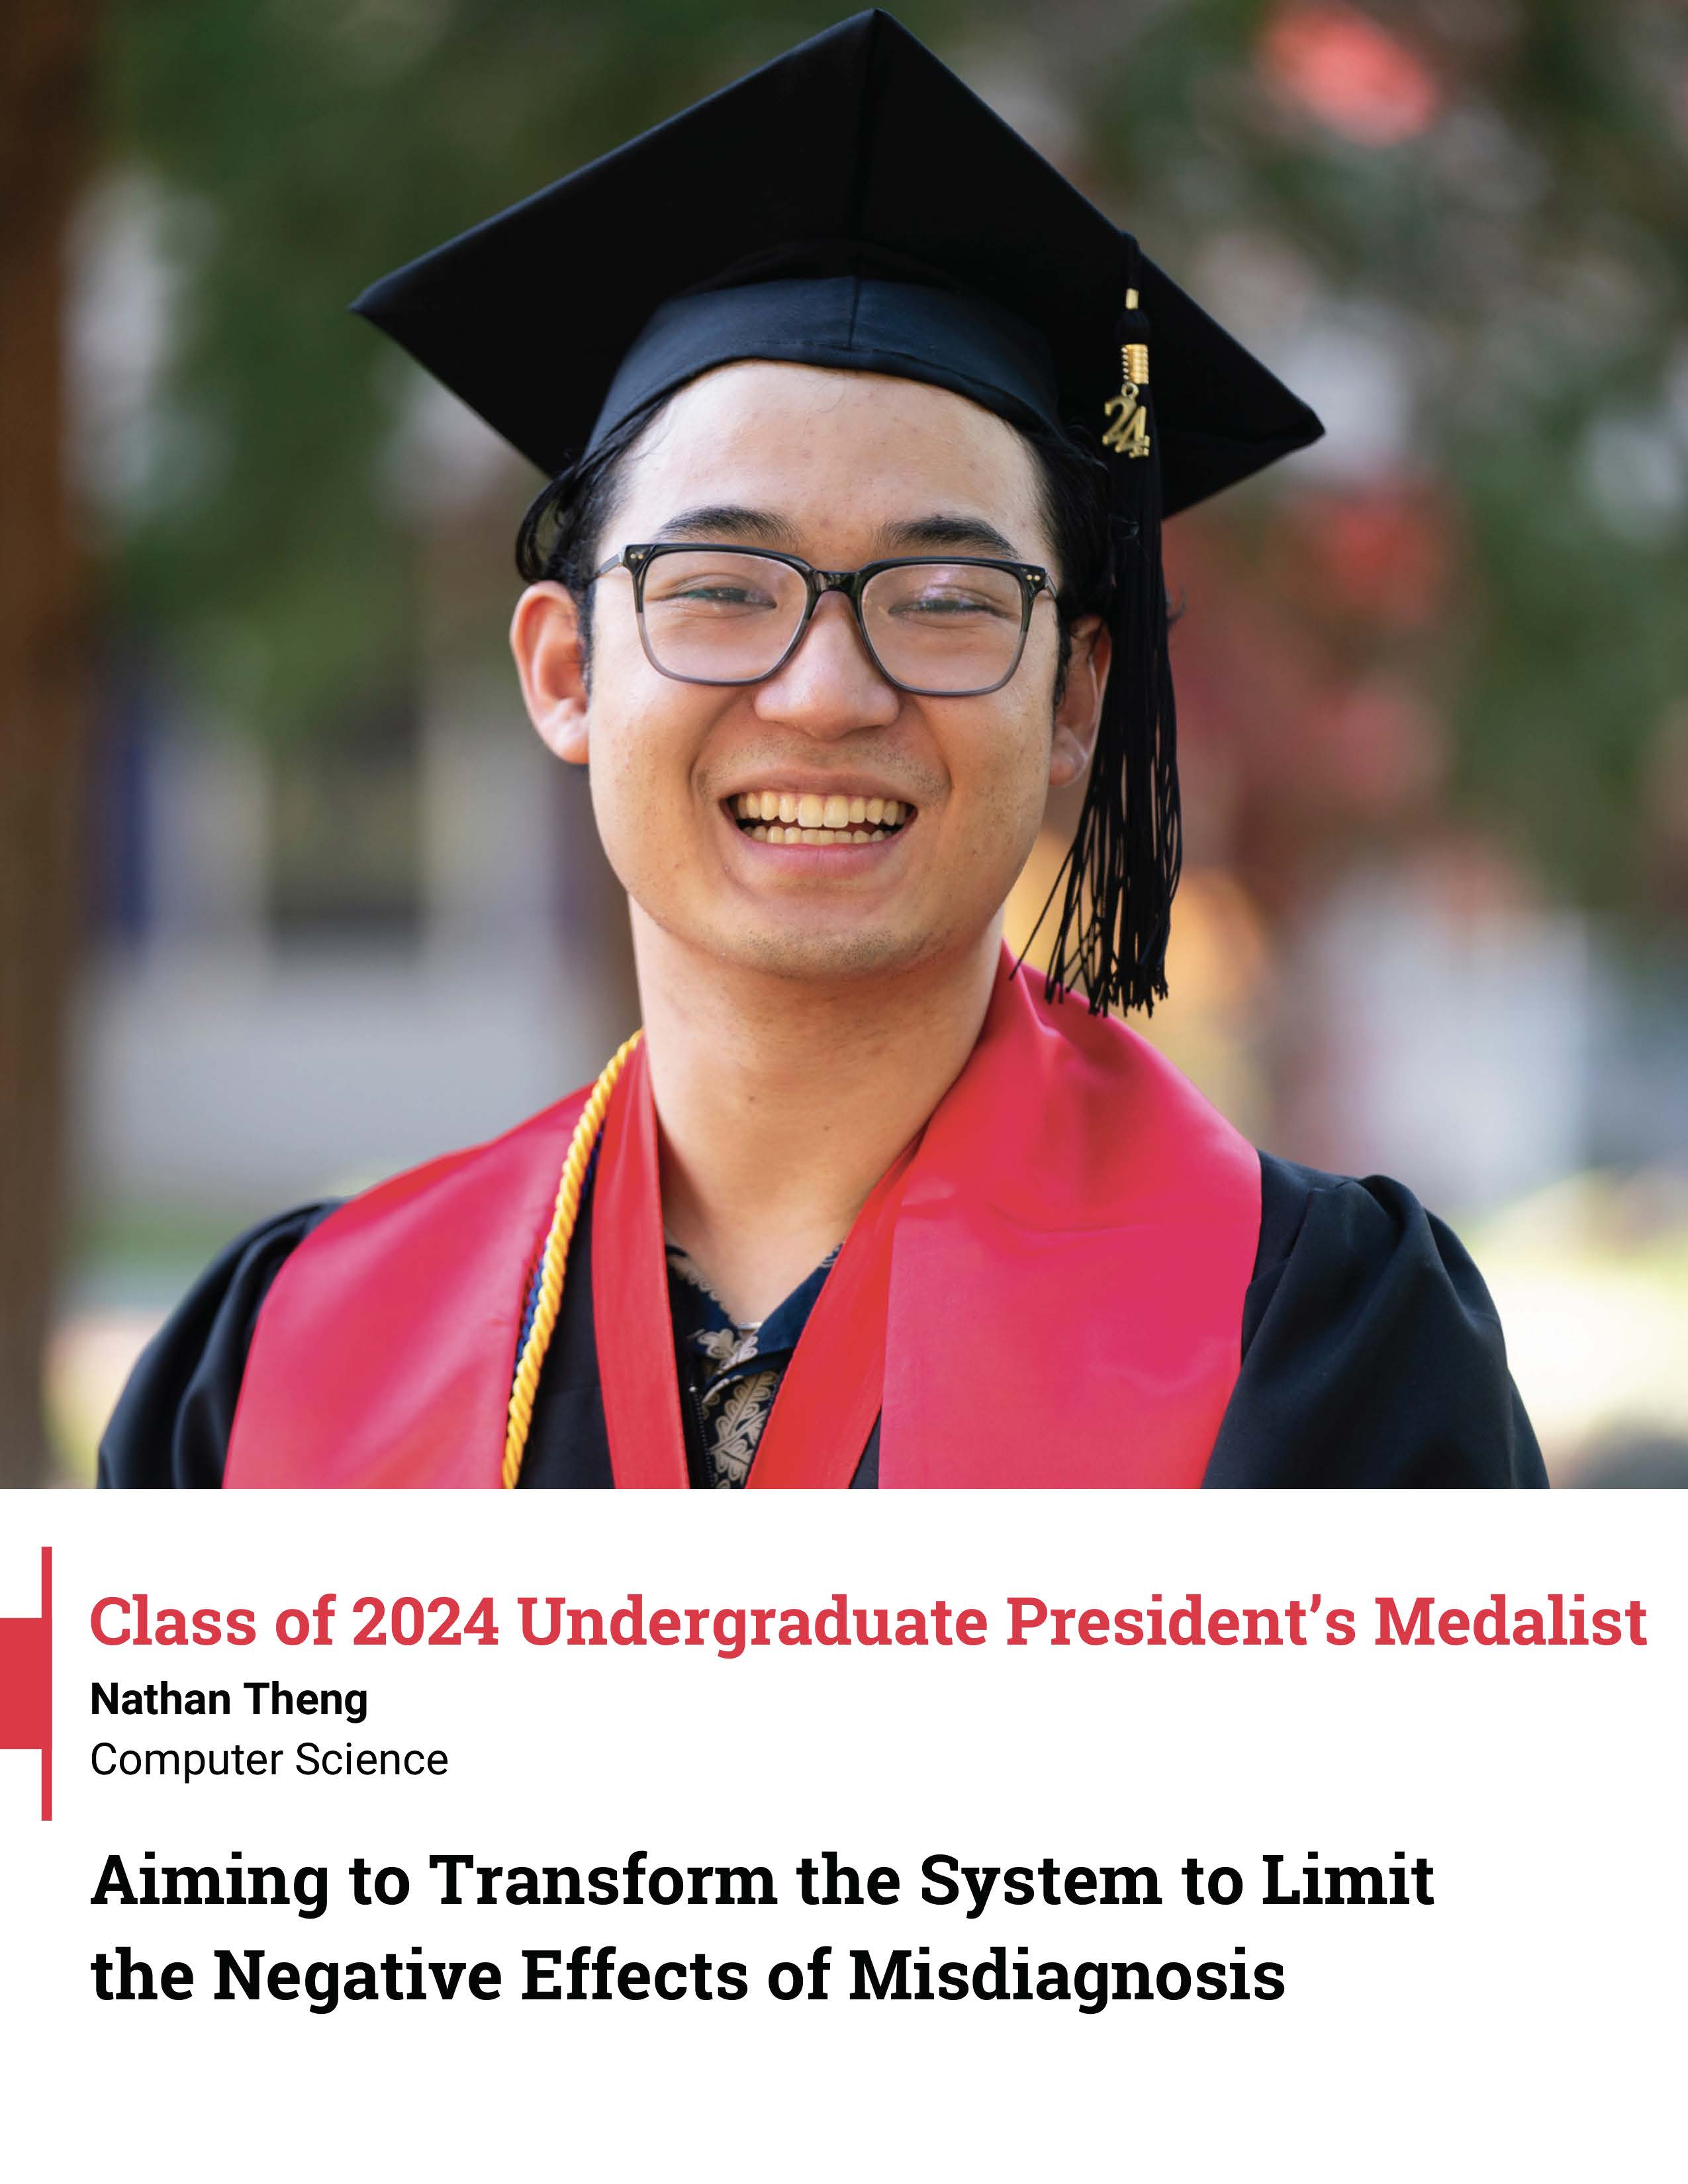 Class if 2024 Undergraduate President's Medalist Nathan Theng